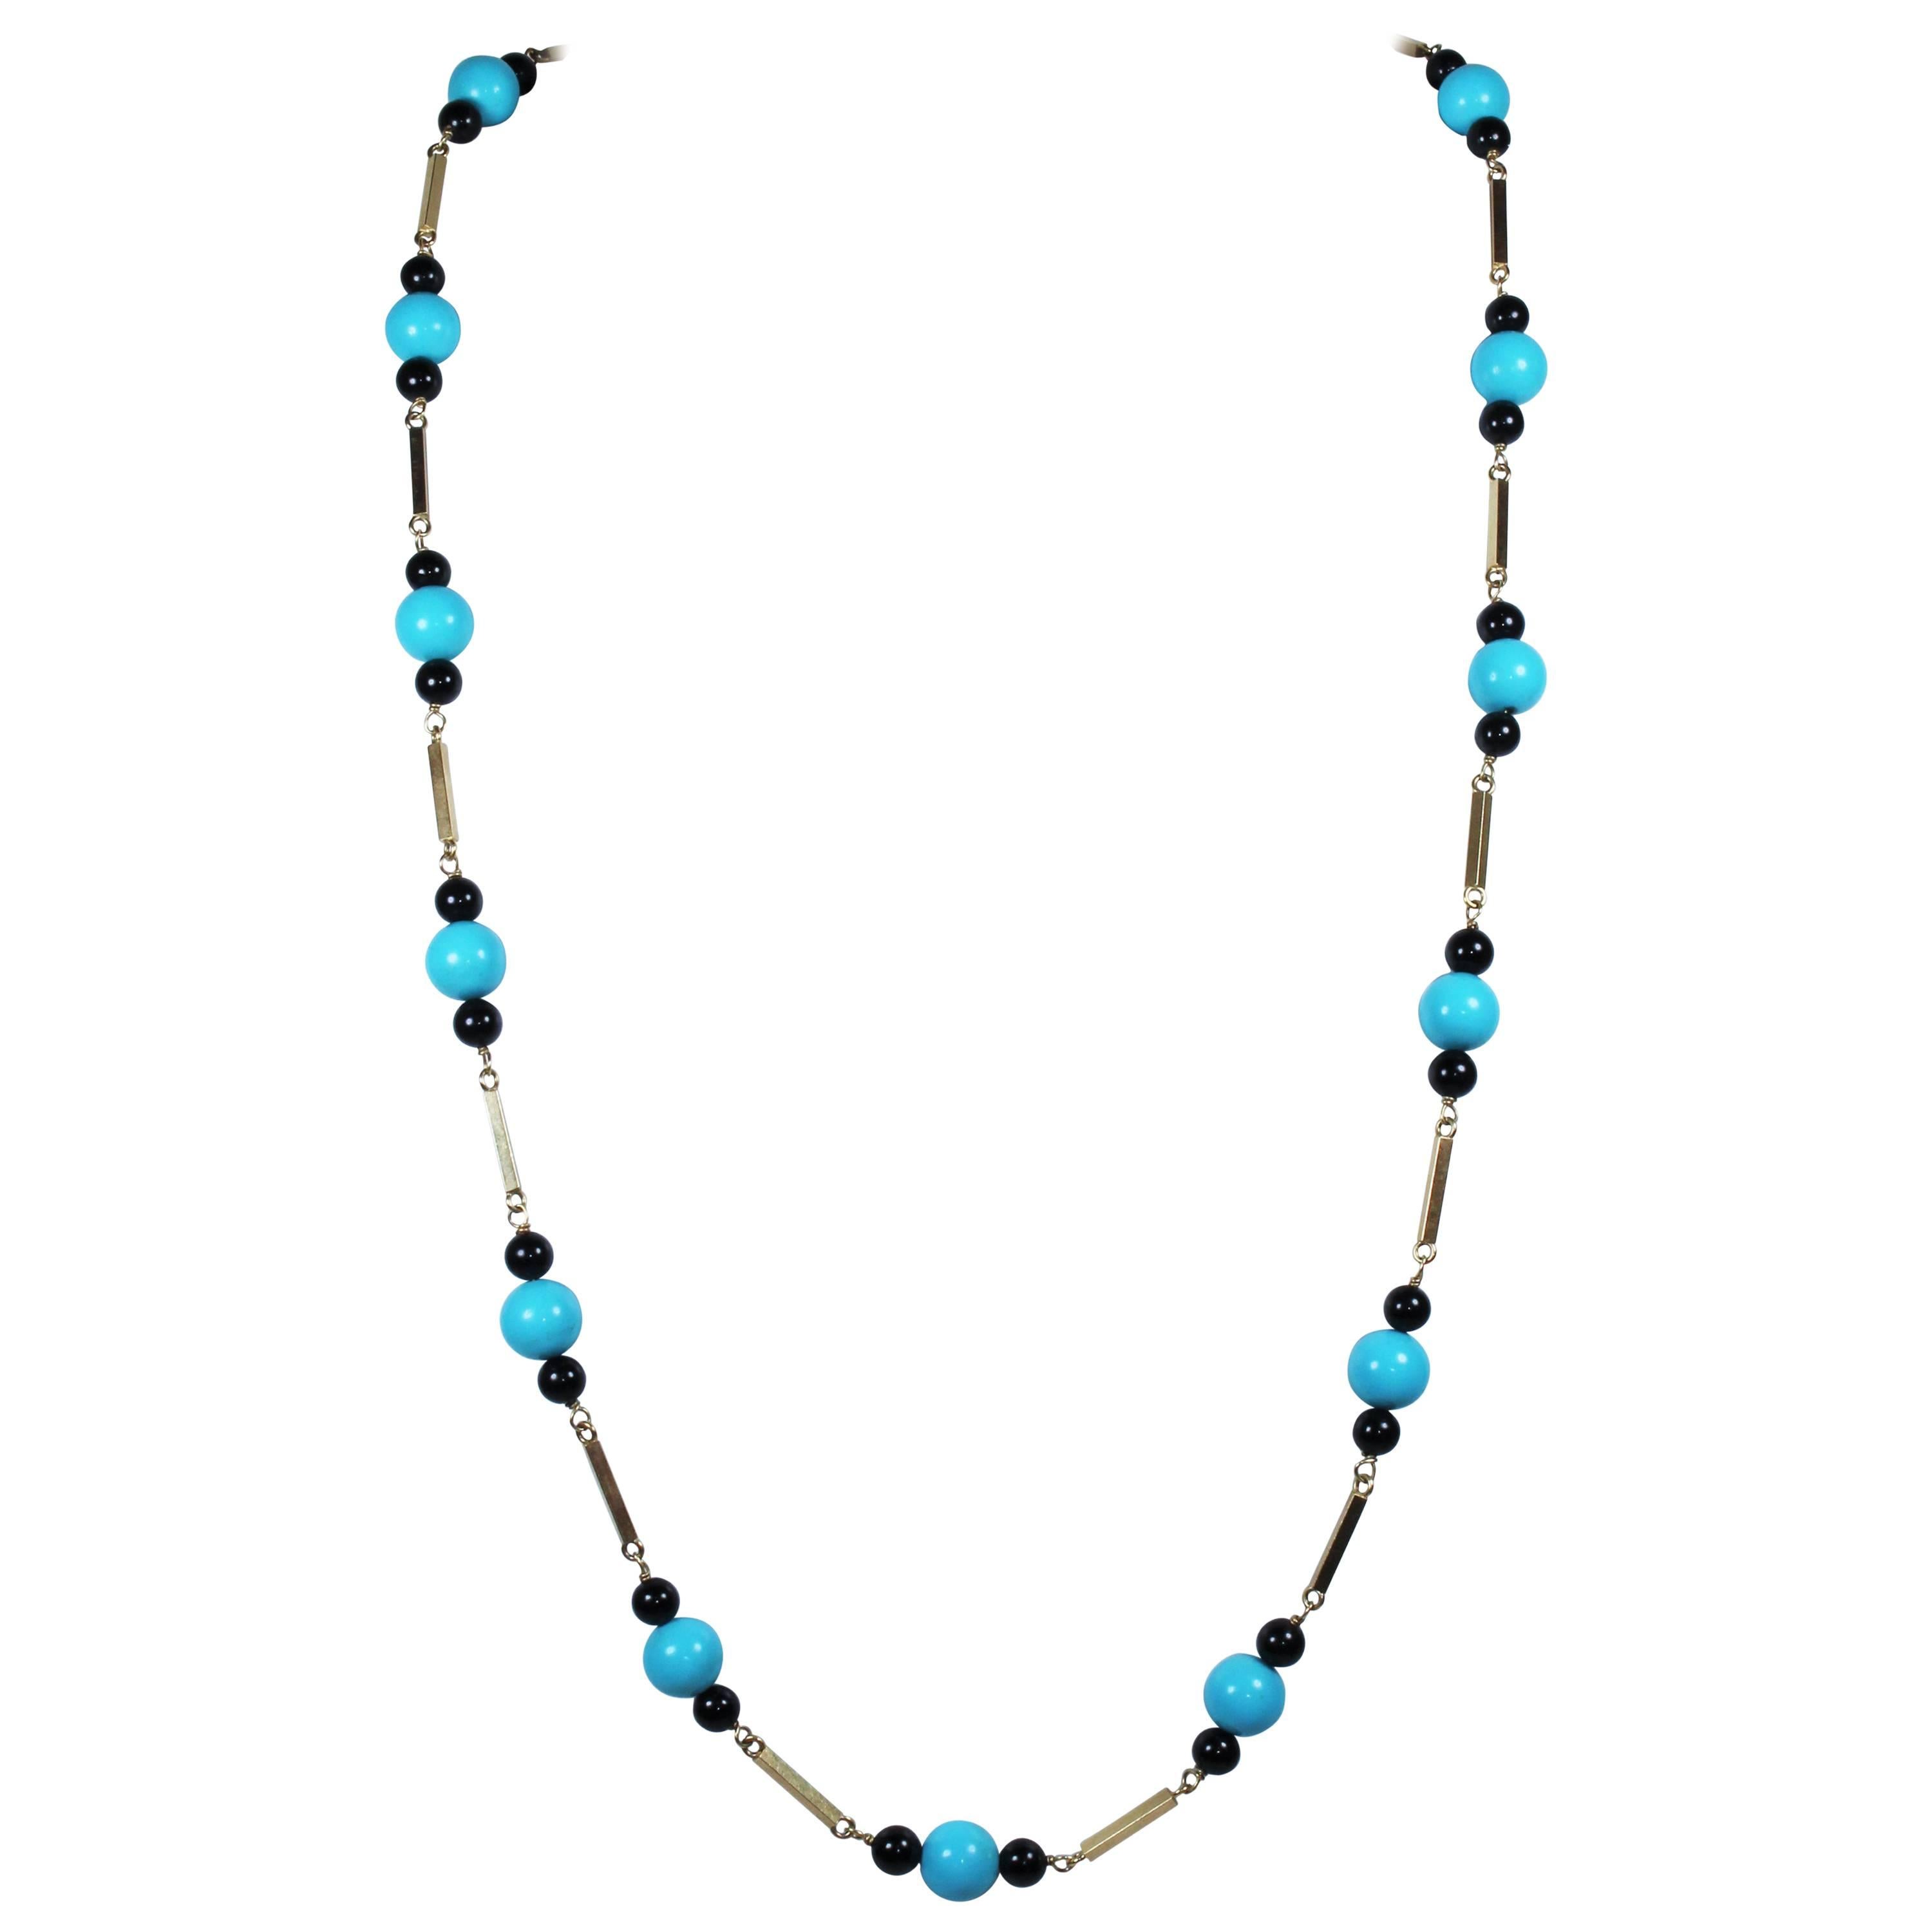 Onyx & Turquoise Bead 14 KT Yellow Gold Necklace or Double Strand Choker